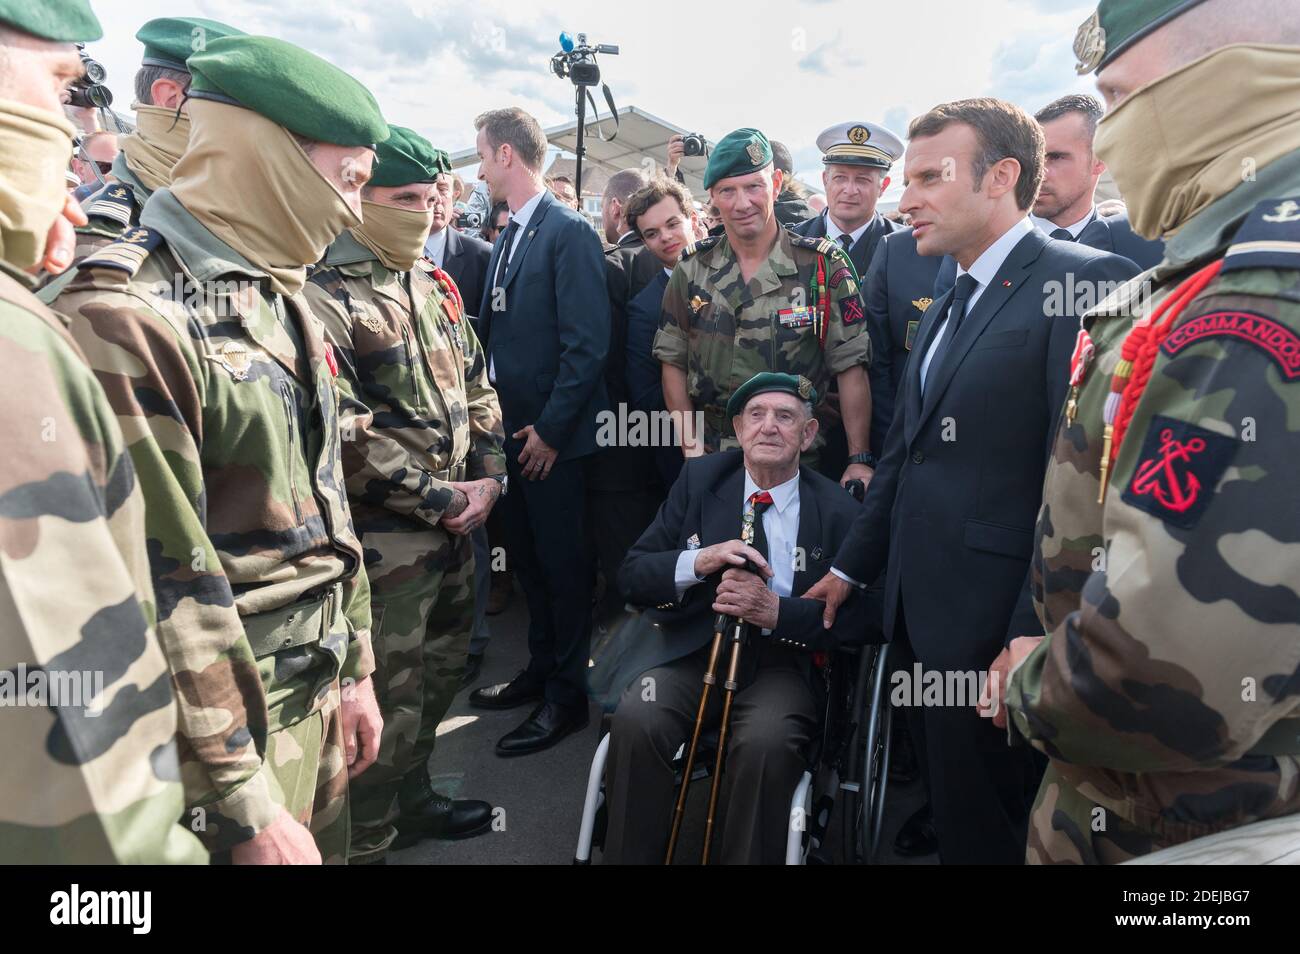 French WWII veteran of the Commando Kieffer Leon Gautier (L) speaks with  French President Emmanuel Macron during a ceremony in tribute to the 177  French Fusiliers Marins of the "Commando Kieffer" who